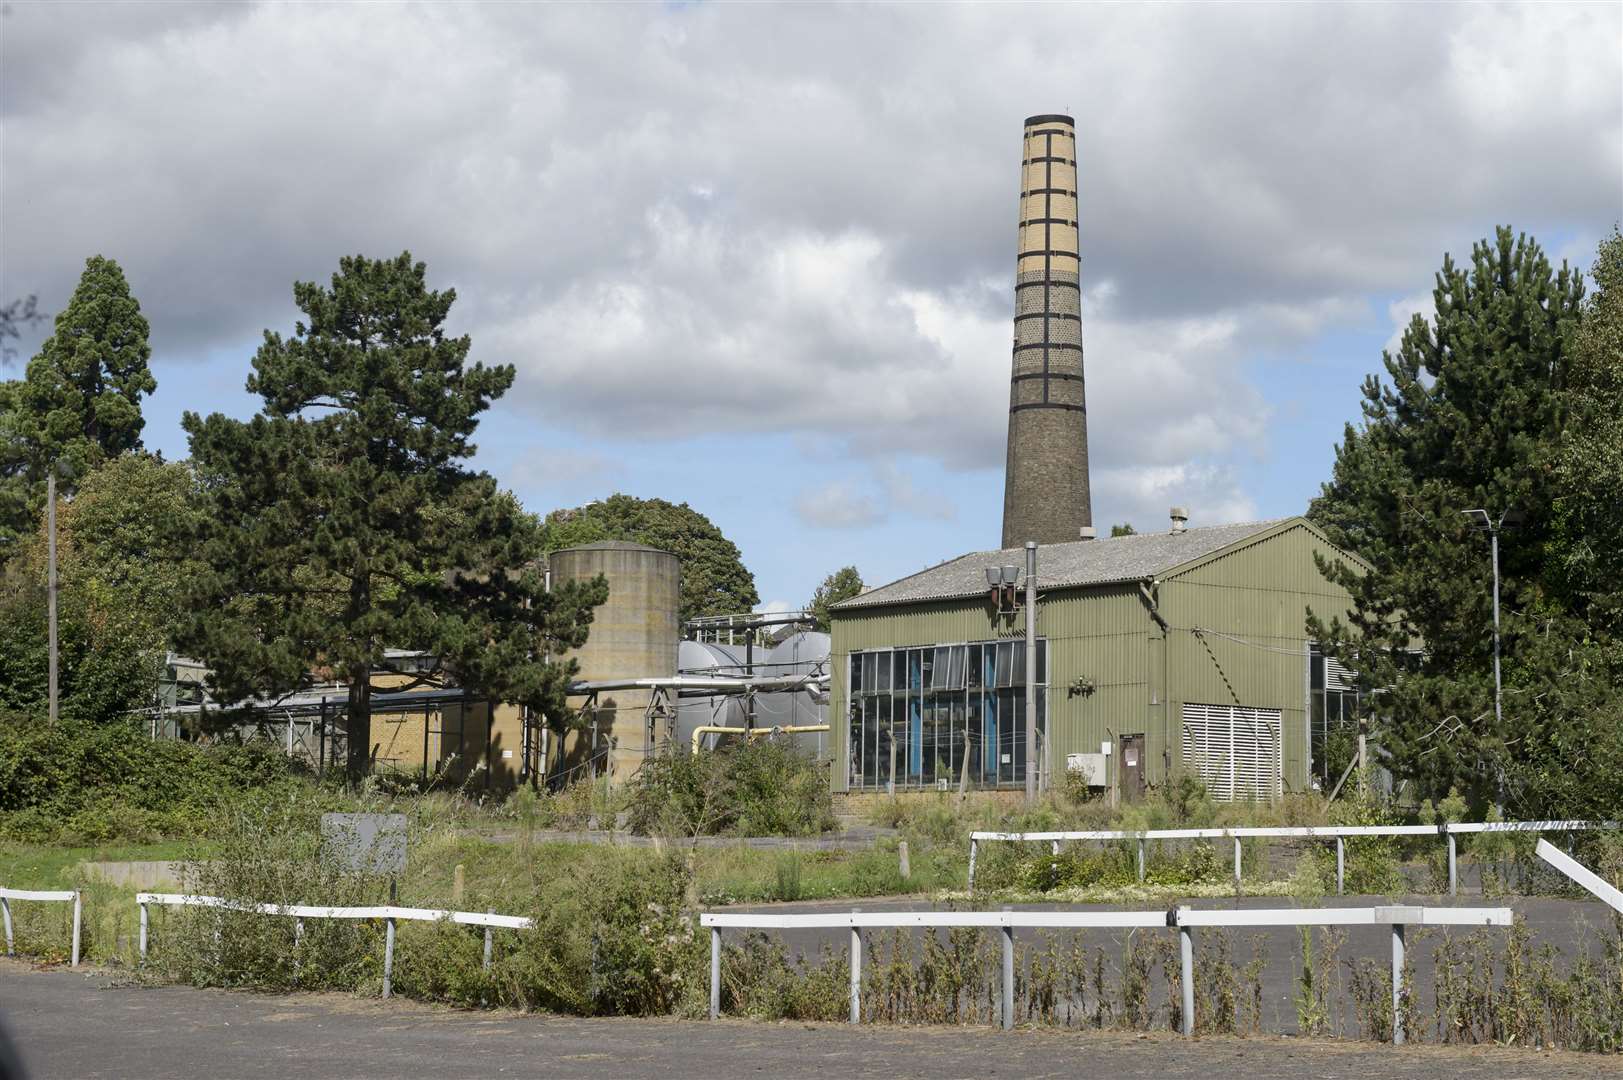 The mill and its iconic chimney